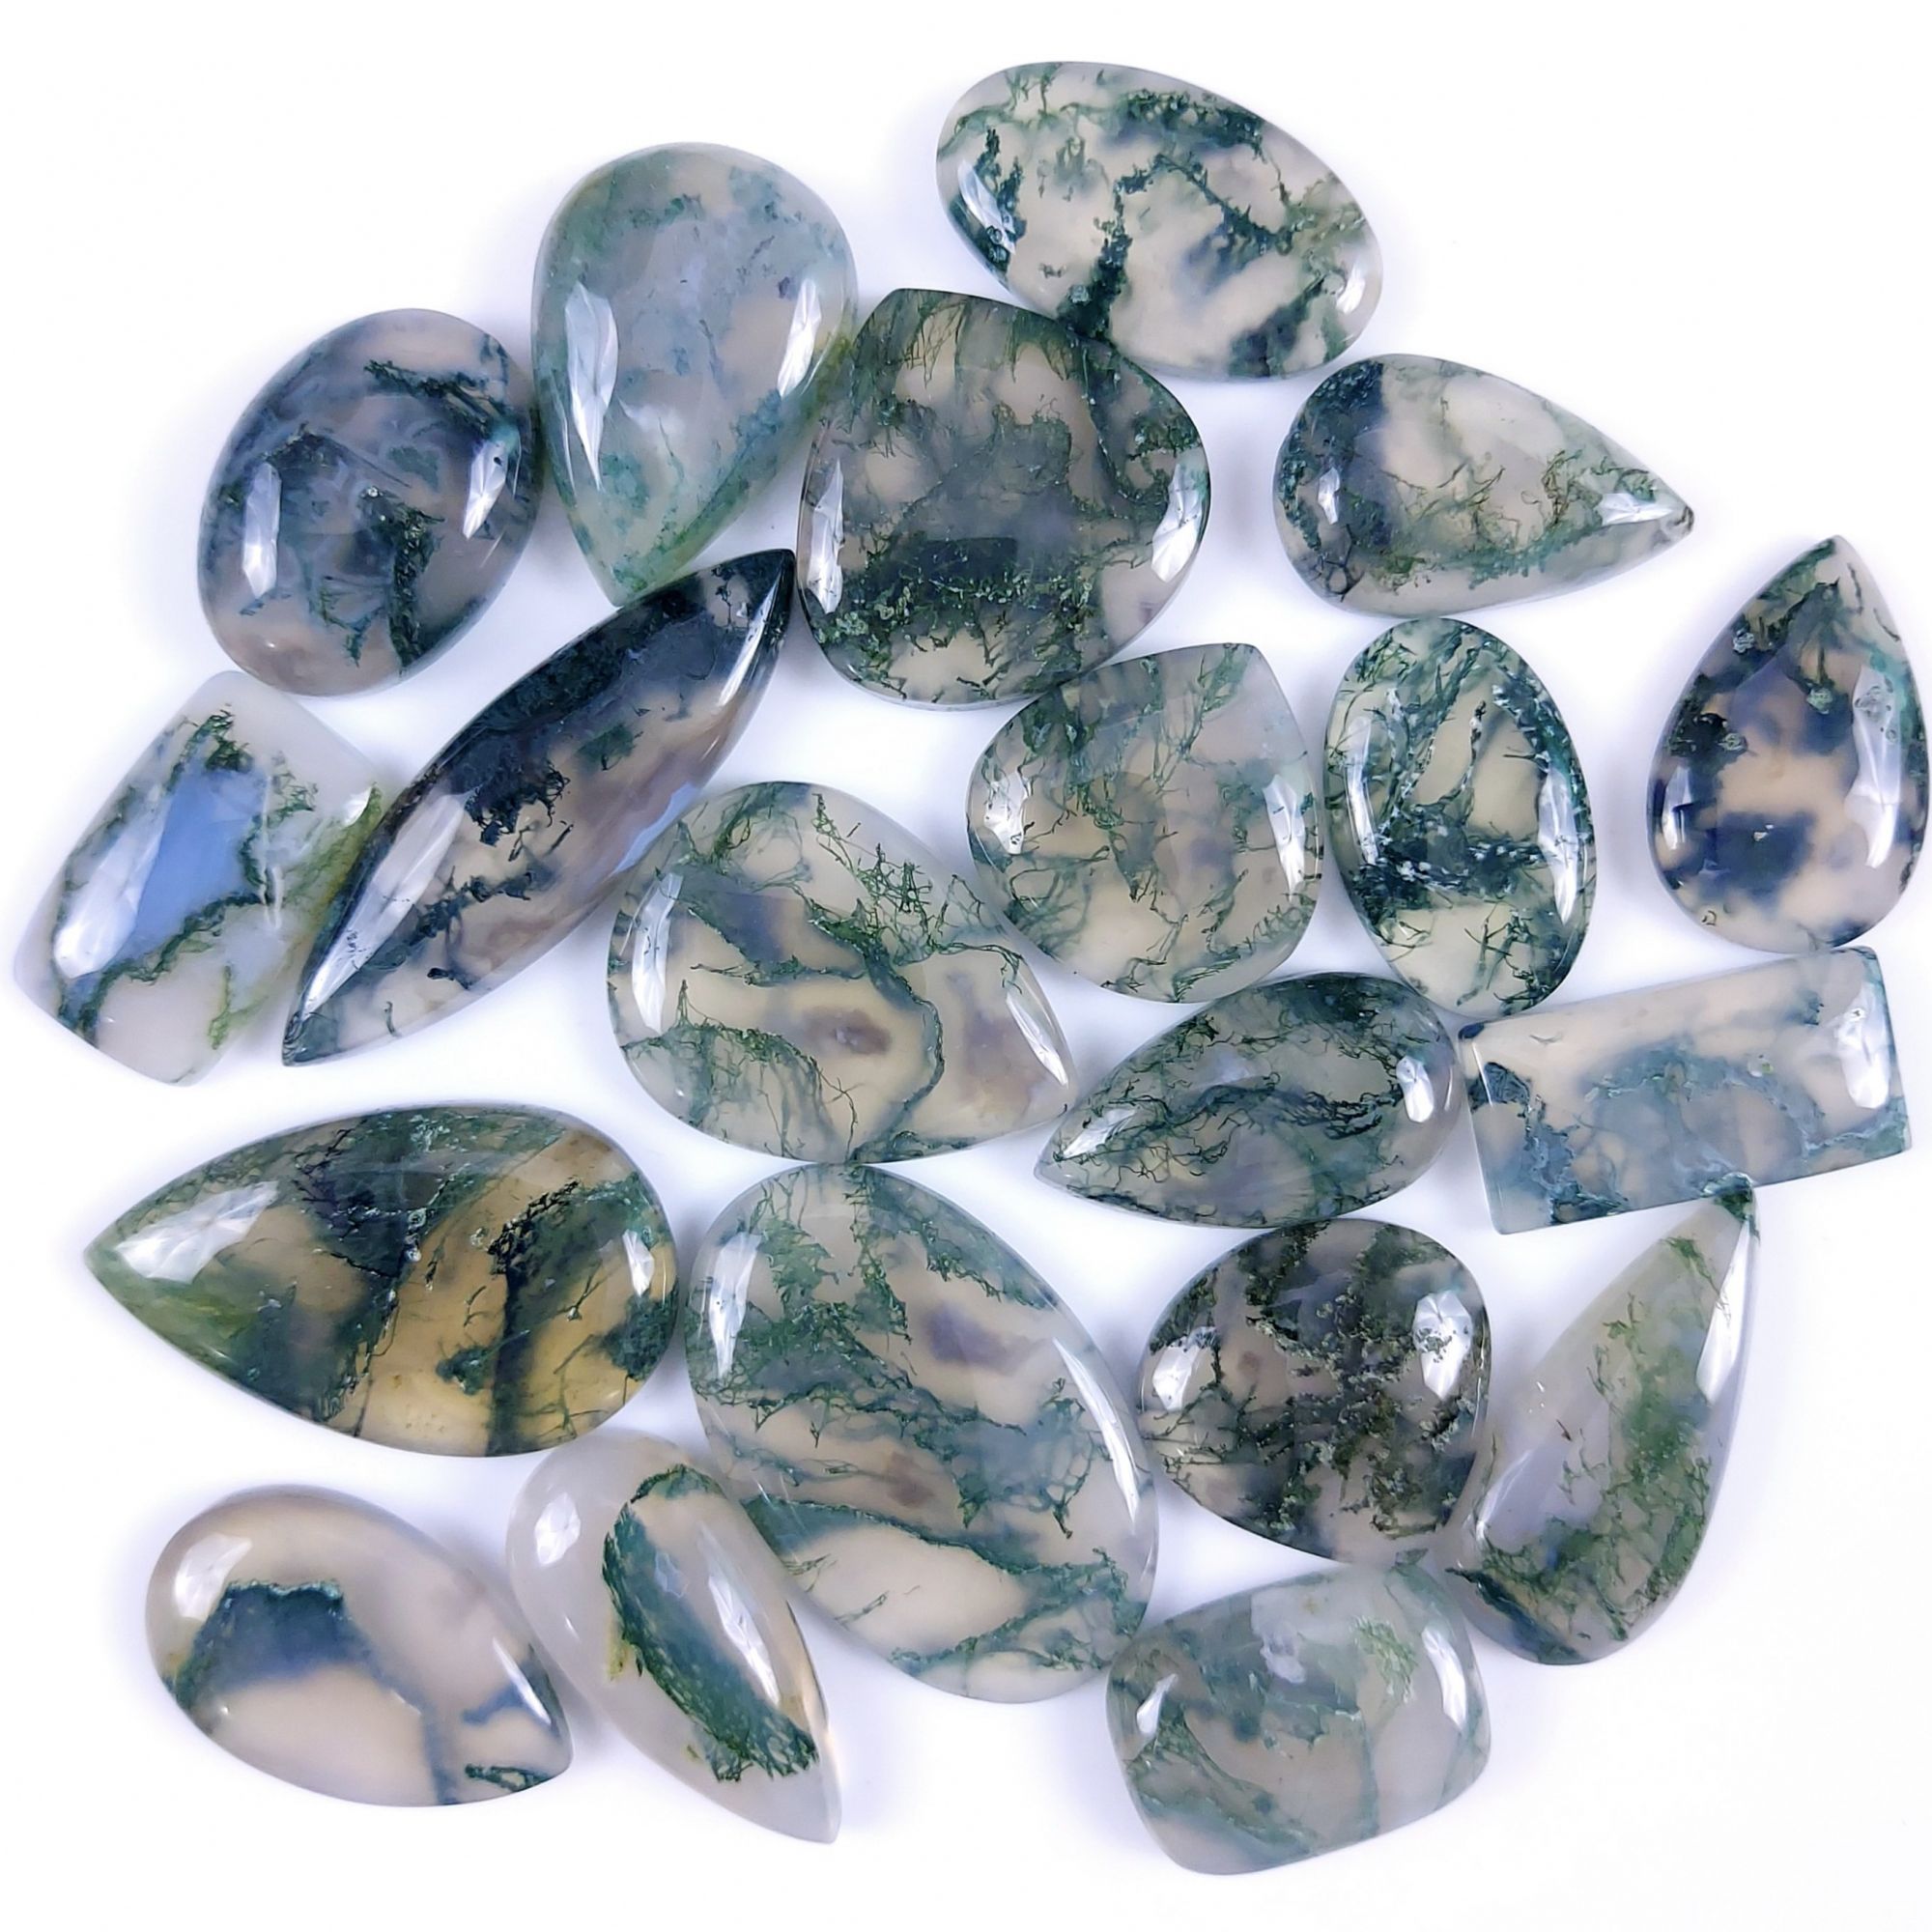 20Pcs 354Cts Natural Green Moss Agate Cabochon Lots Mixed Shapes And Sizes Moss Agate loose gemstone Cabochon Wholesale Lot 40x12 22x14 mm #8079